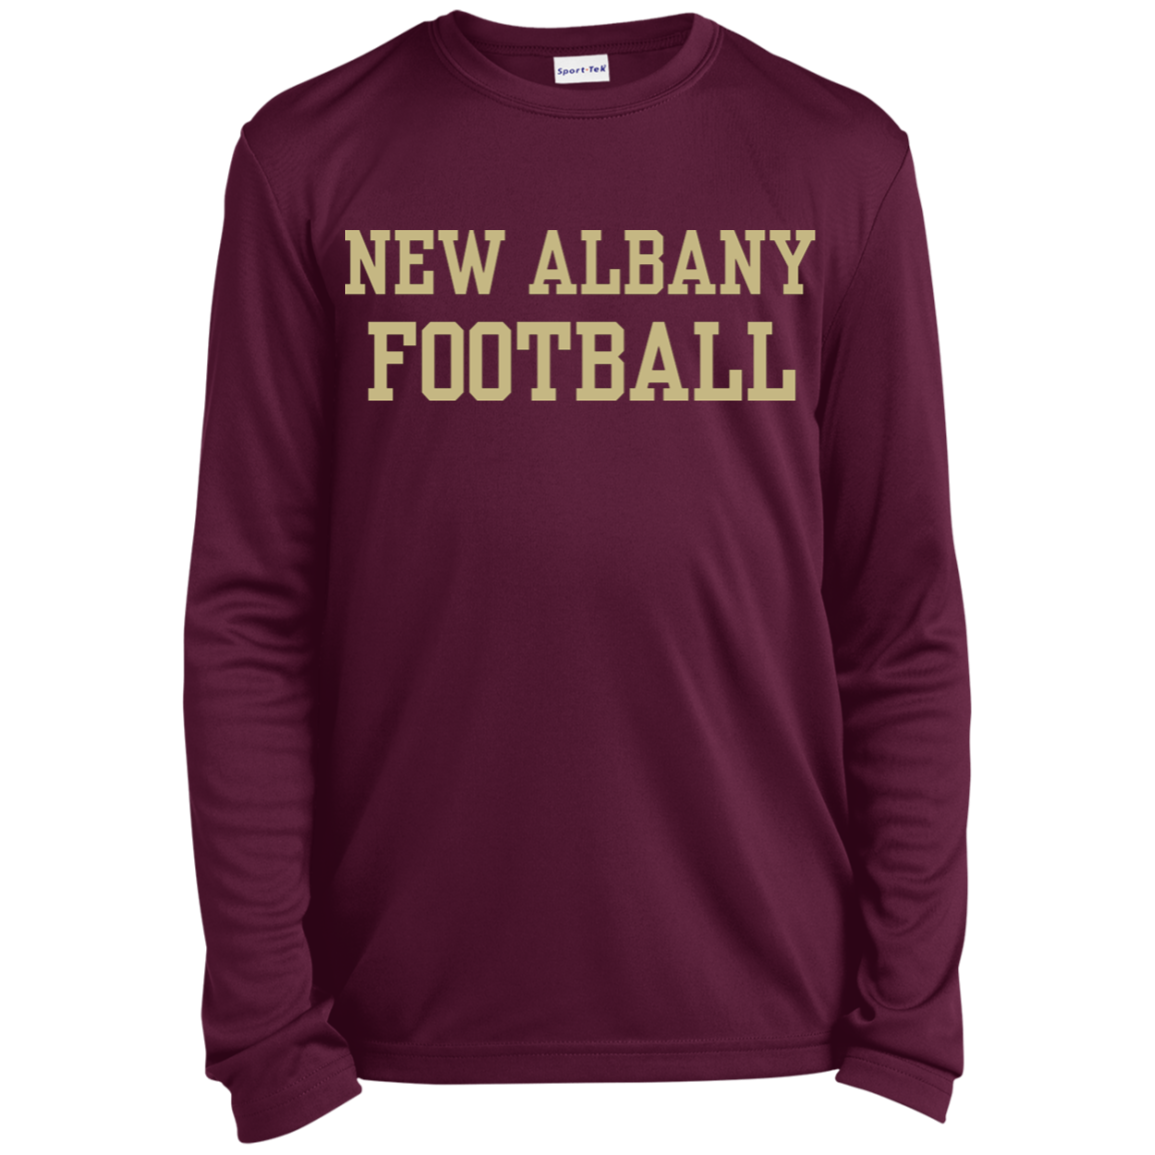 Youth Team Football Long Sleeve Performance Graphic Tee - New Albany Eagles